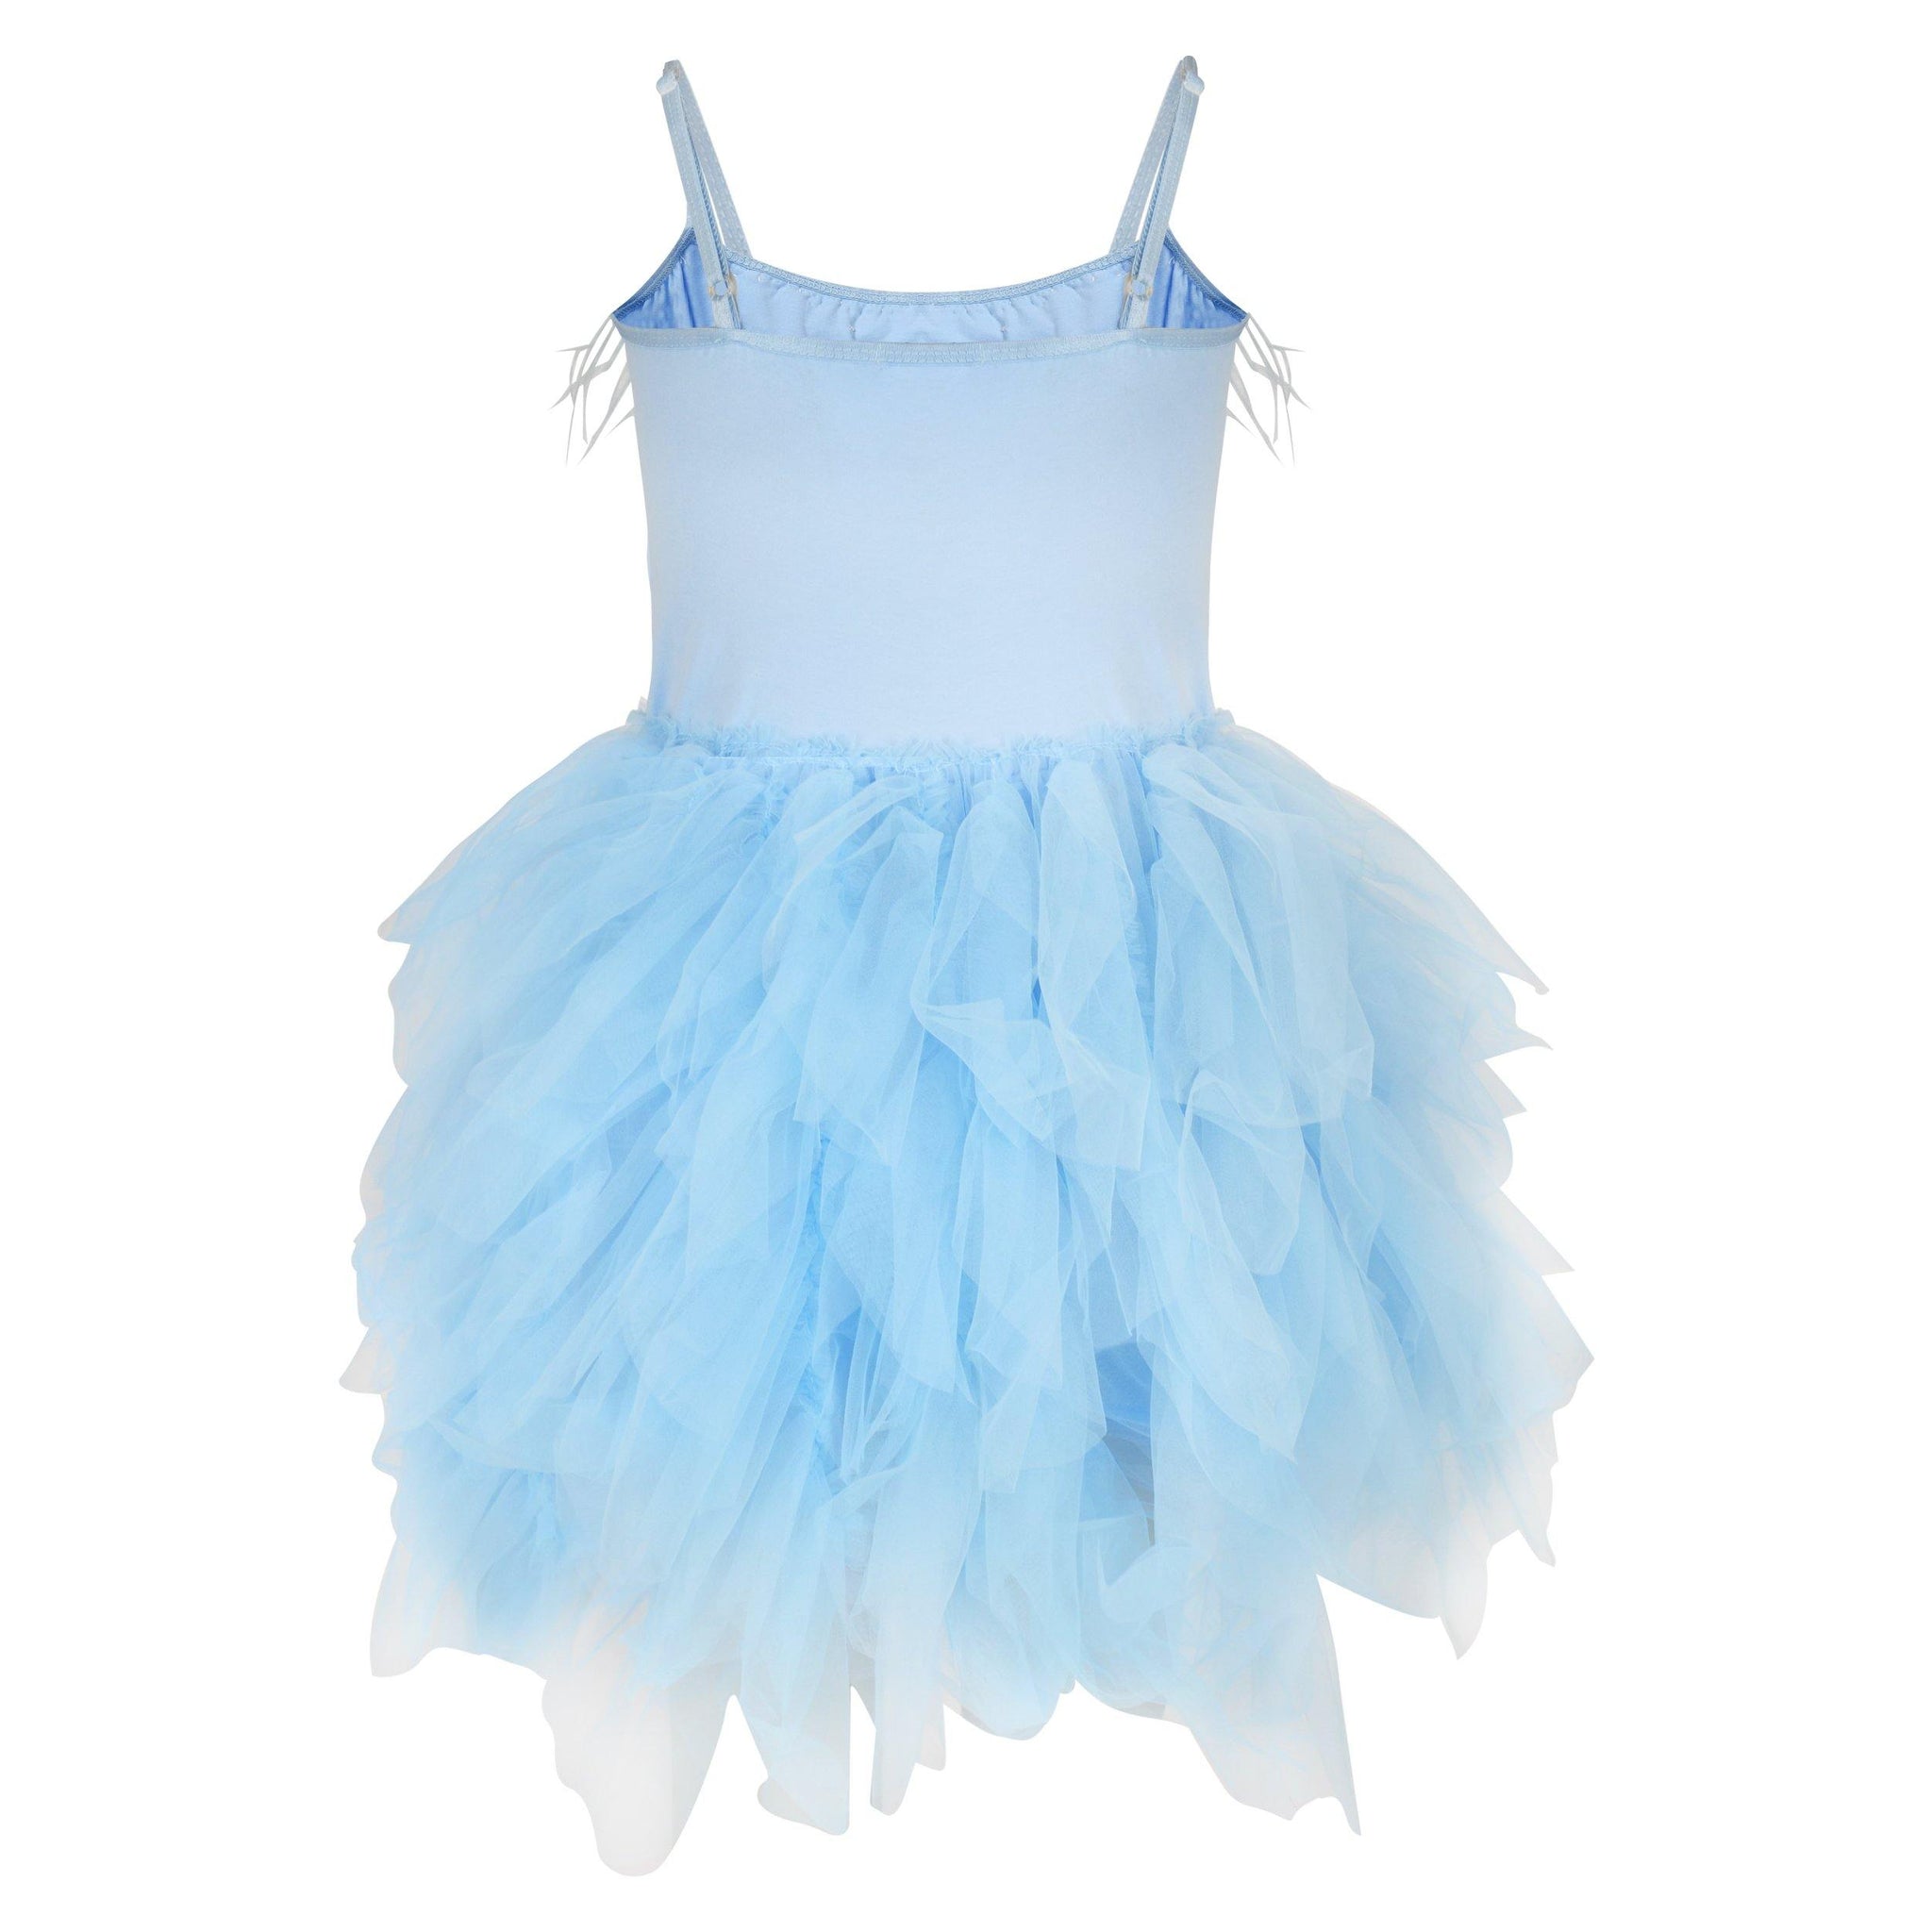 Feathers and Frills Dress in blue